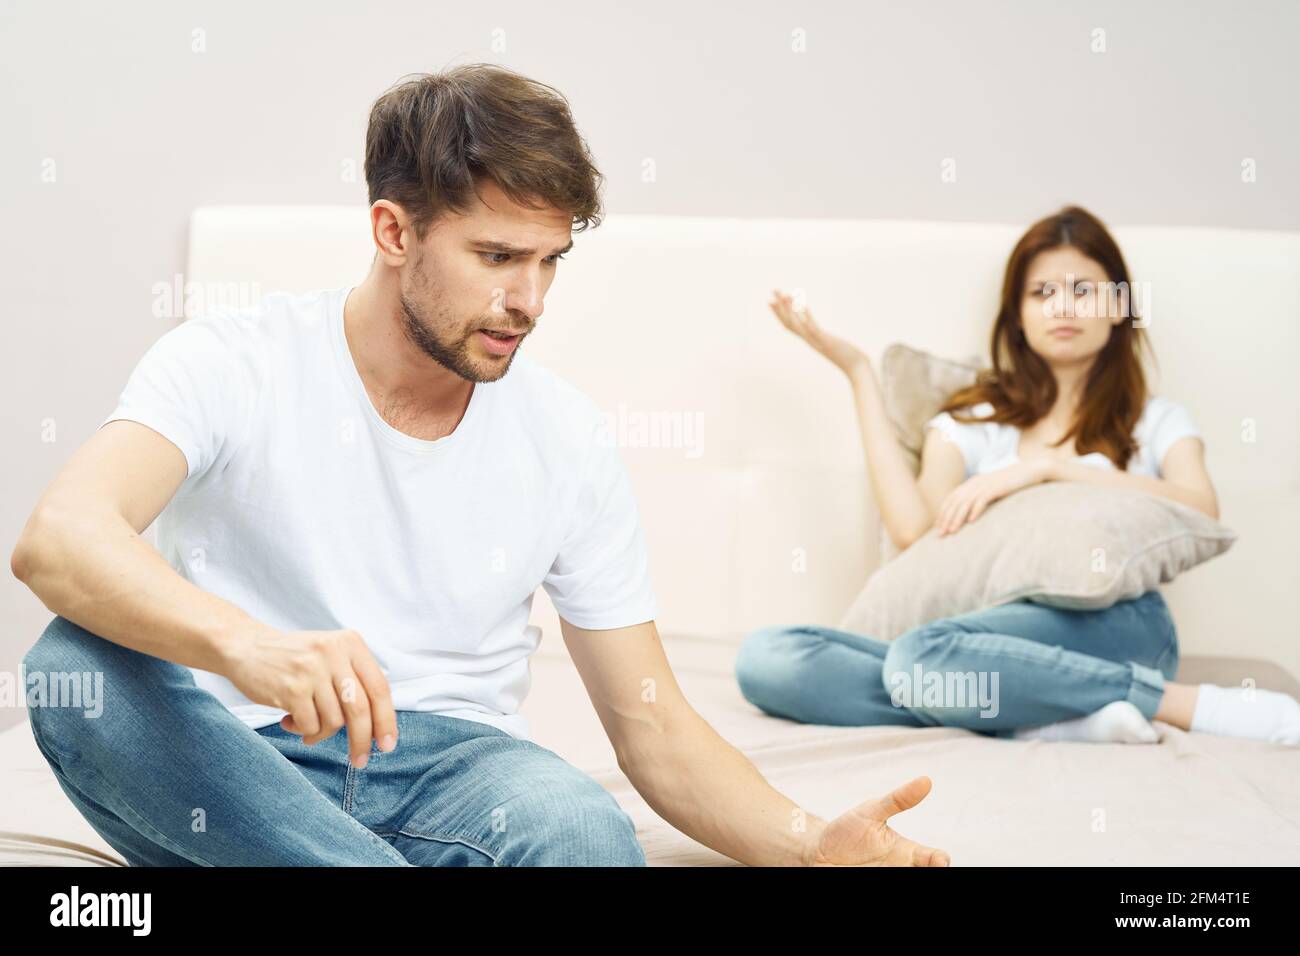 a man in a white t-shirt and jeans communicates with a woman on the bed in the background Stock Photo